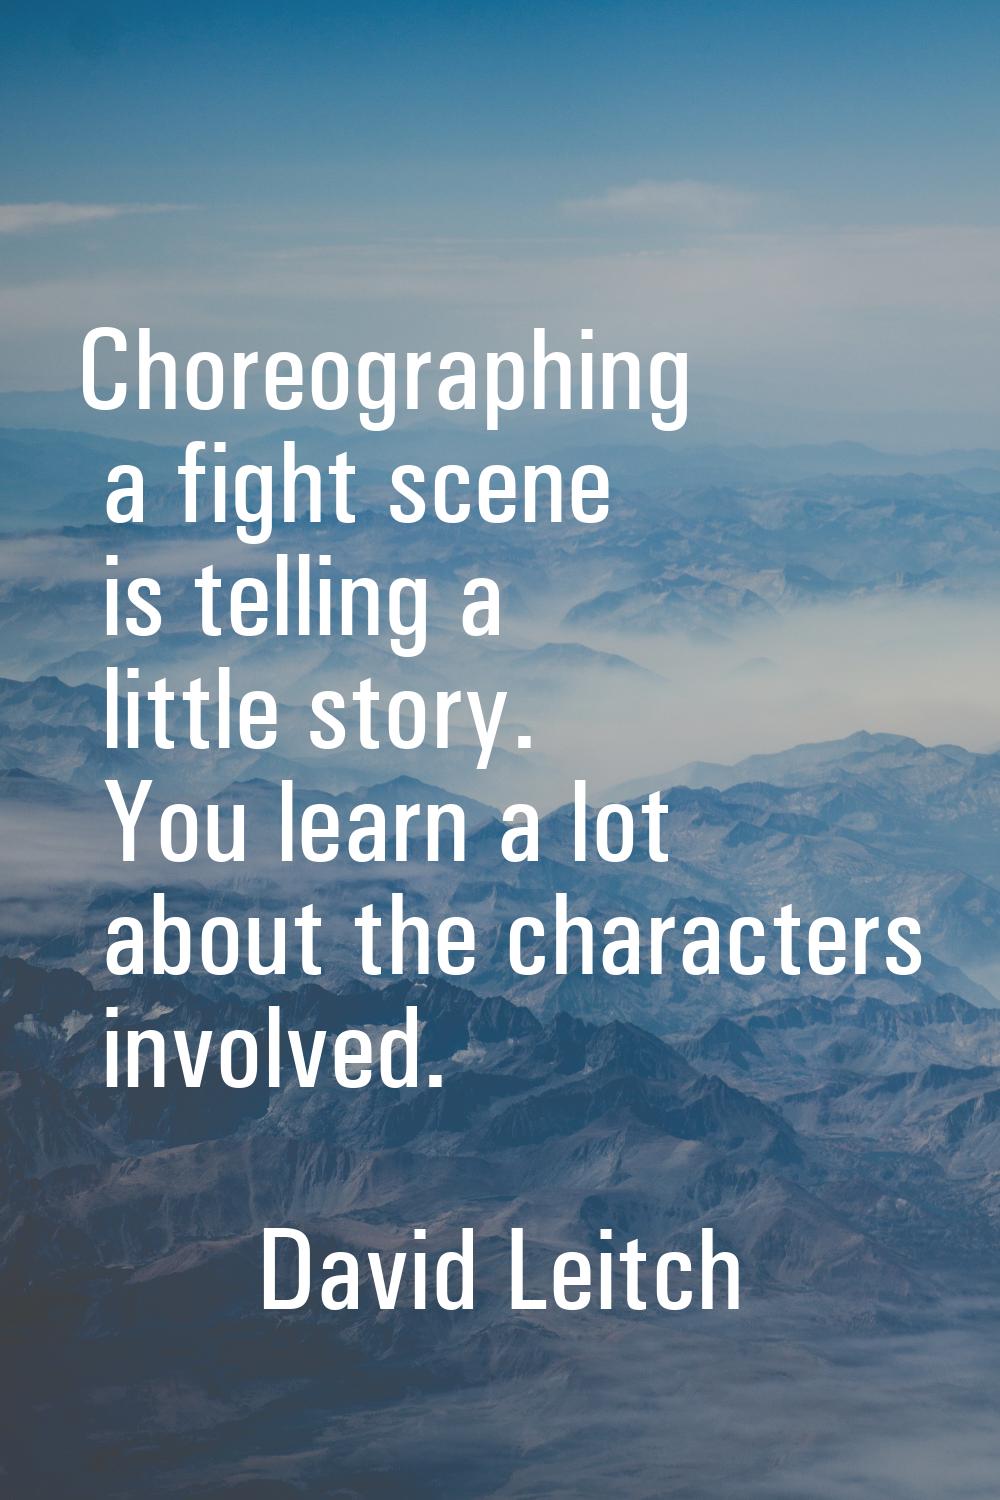 Choreographing a fight scene is telling a little story. You learn a lot about the characters involv